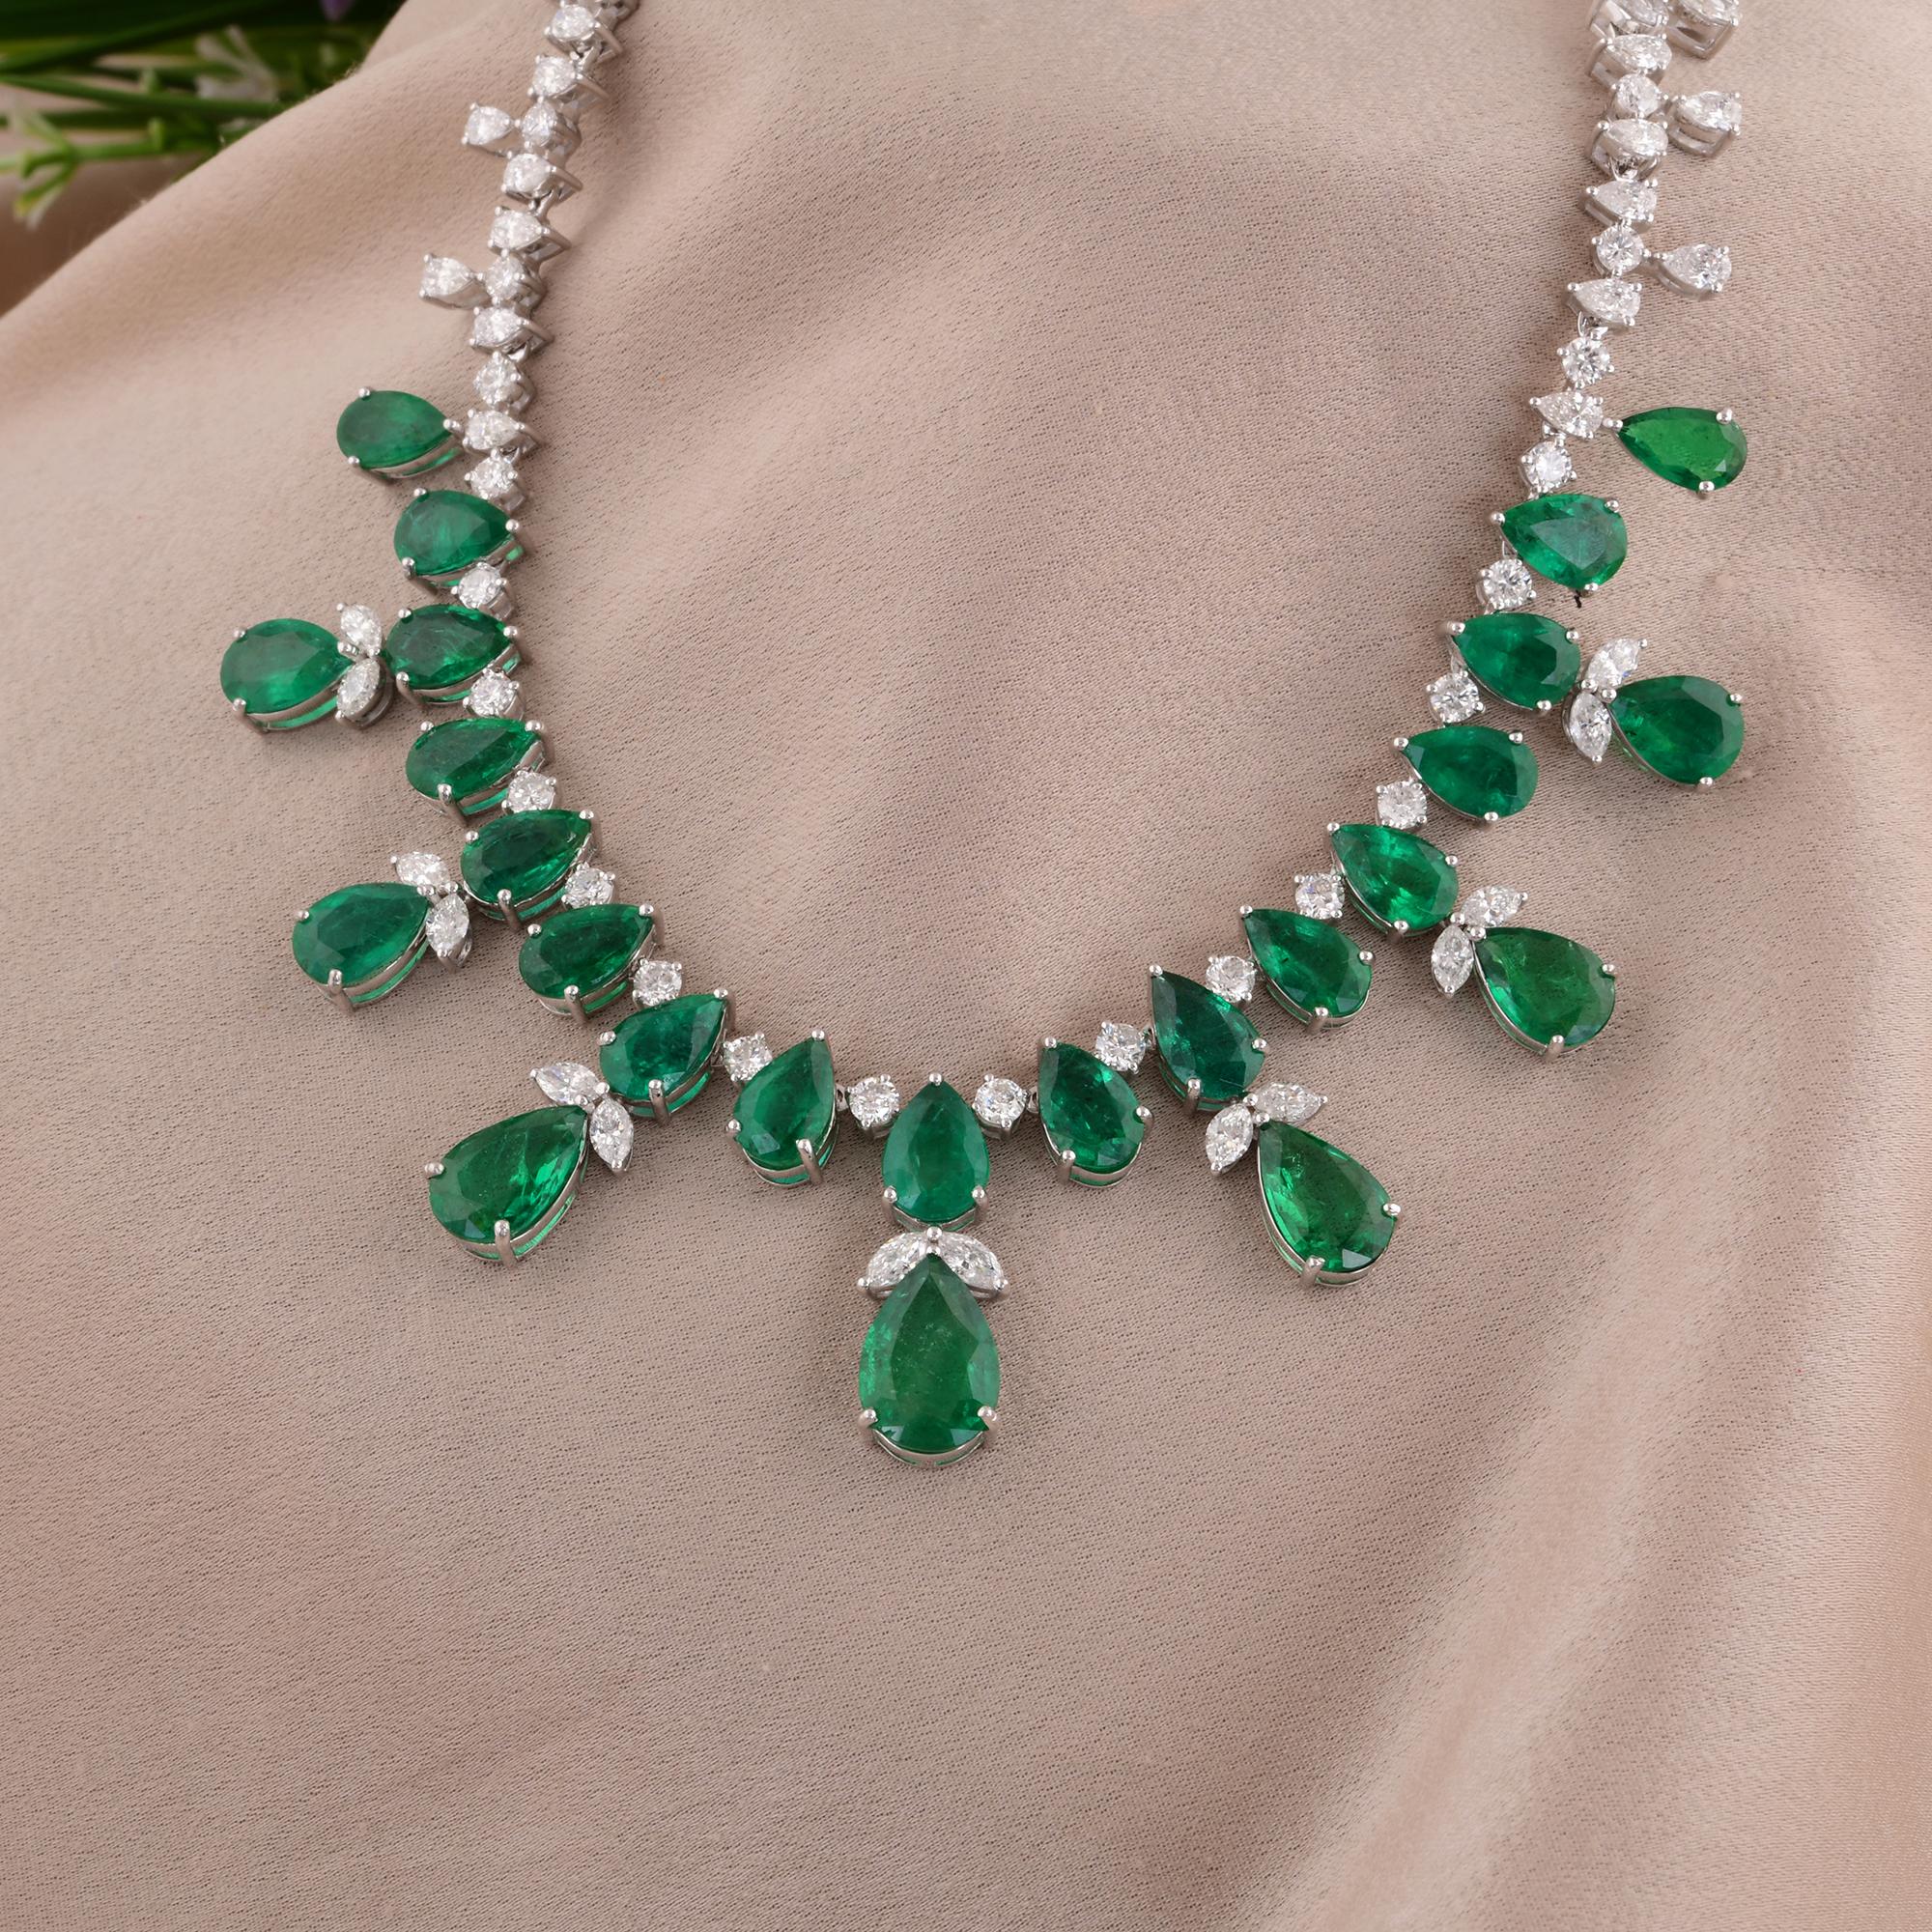 At the heart of this magnificent piece shines a resplendent pear-shaped Zambian emerald, renowned for its intense green hue and unparalleled clarity. Sourced from the depths of Africa, this natural gemstone radiates an aura of sophistication and